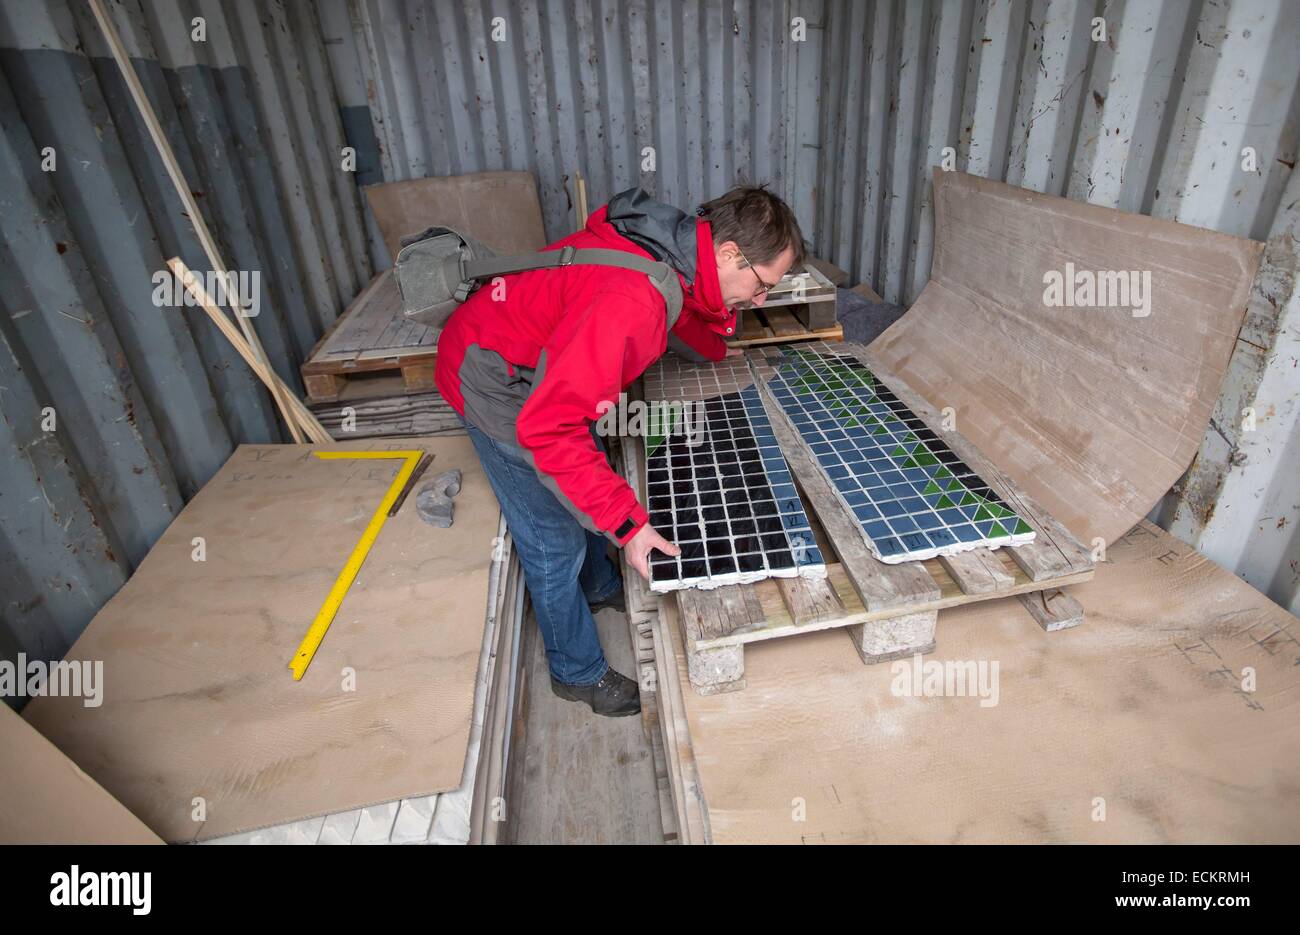 Erfurt, Germany. 15th Dec, 2014. Art restorer Peter Jung examines segments of a wall mosaic titled 'Die Beziehung des Menschen zu Natur und Technik' (the relationship between humans to nature and technology) by Spanish artist Josep Renau in a container in Erfurt, Germany, 15 December 2014. The restoration work of the mosaic, which was threatened by the demolition of the cutlure and leisure centre 'Moskauer Platz' in Erfurt, is expected to amount to 400,000 euro. Photo: Michael Reichel/dpa/Alamy Live News Stock Photo